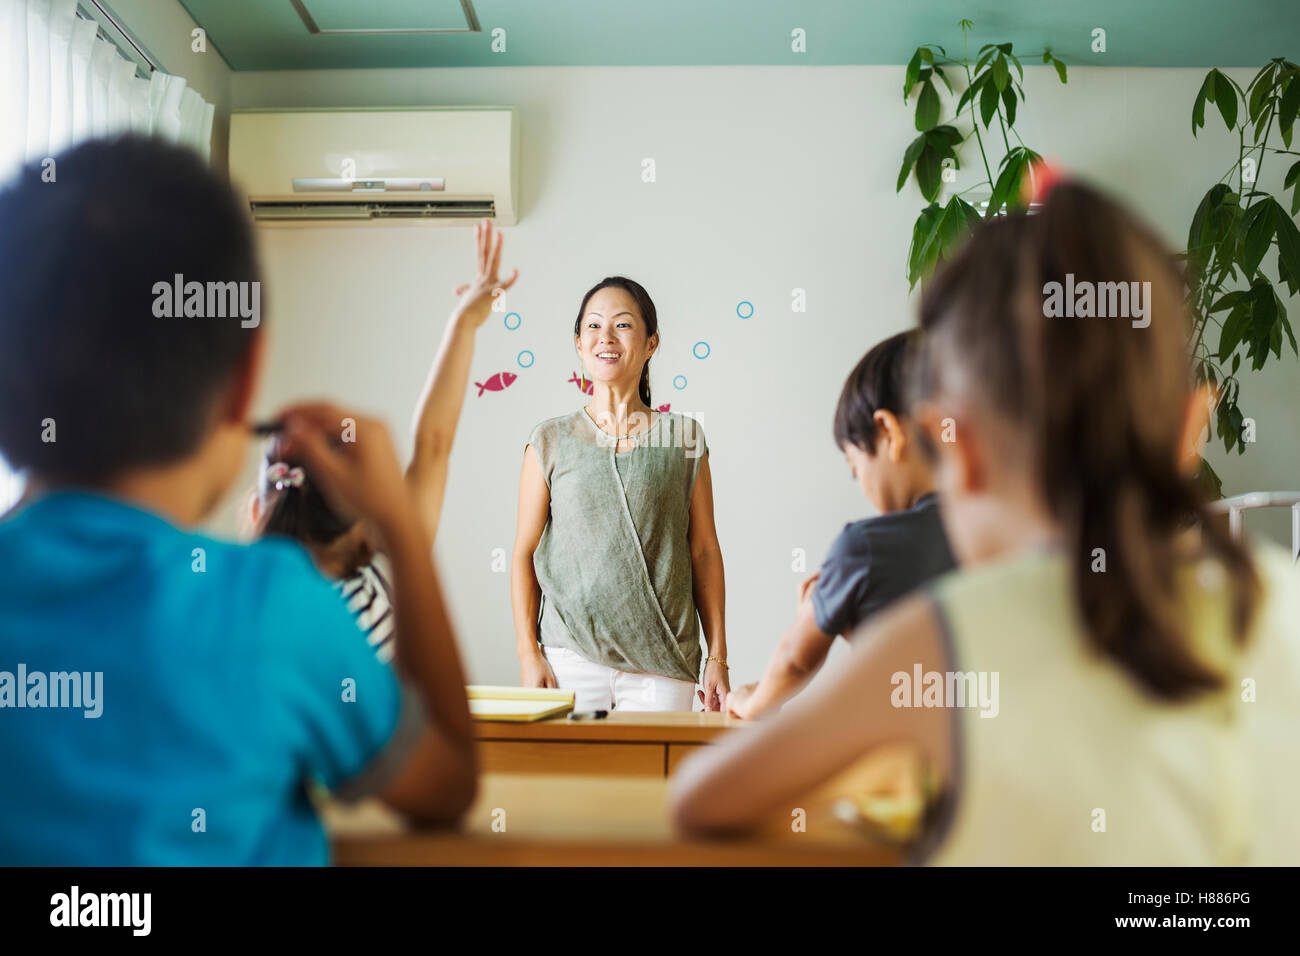 A group of children in a classroom, one with her hand up ready to answer a question. Stock Photo